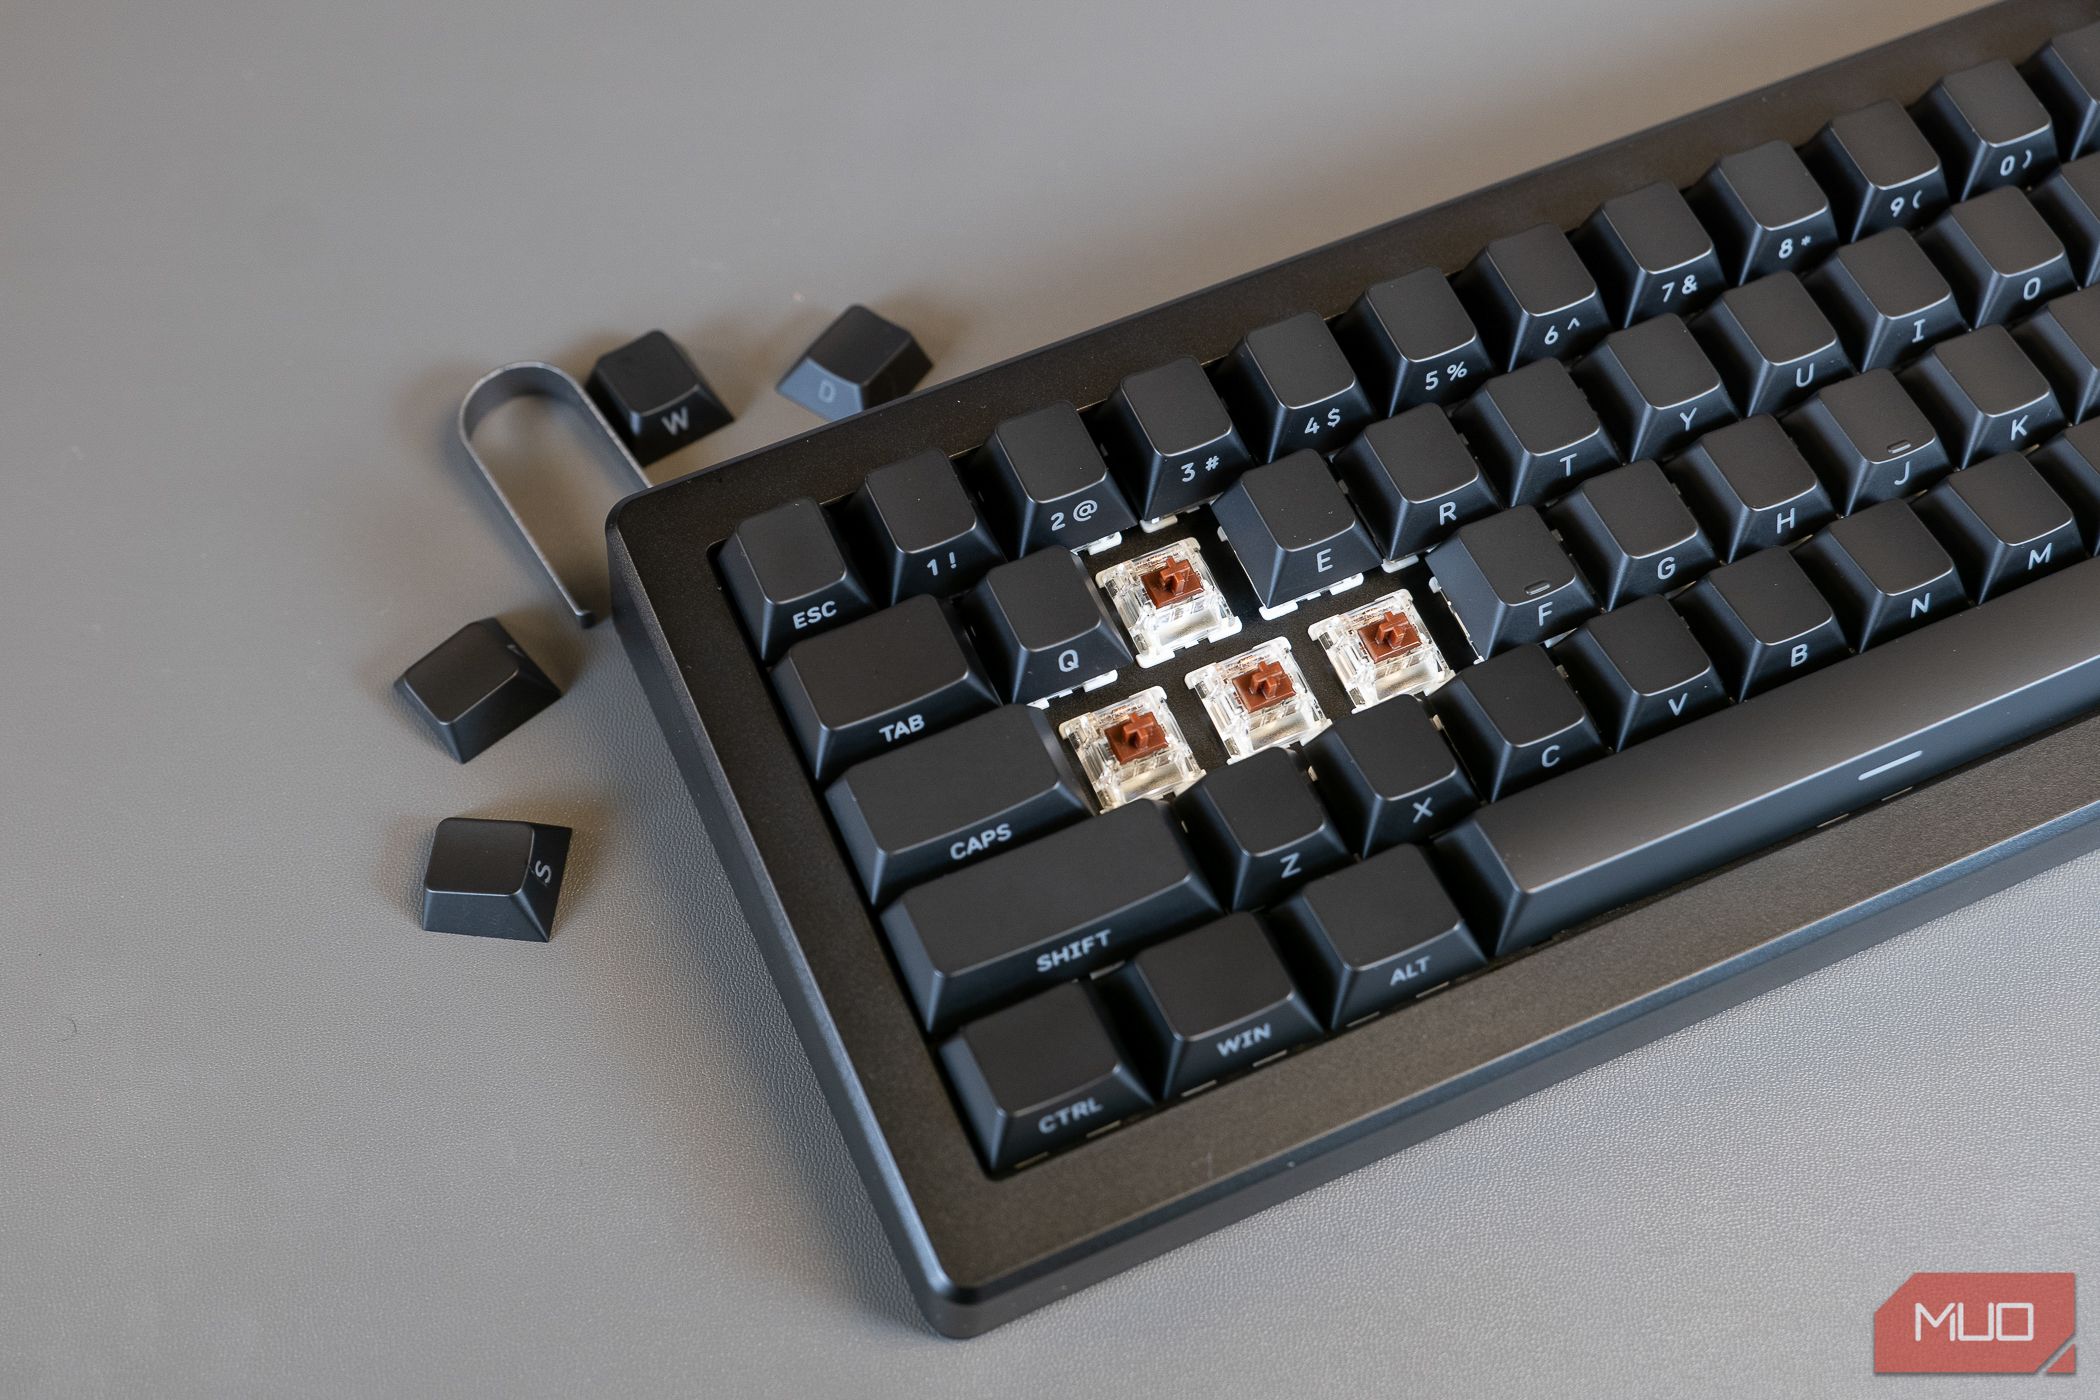 The Drop CSTM65 with keycaps removed